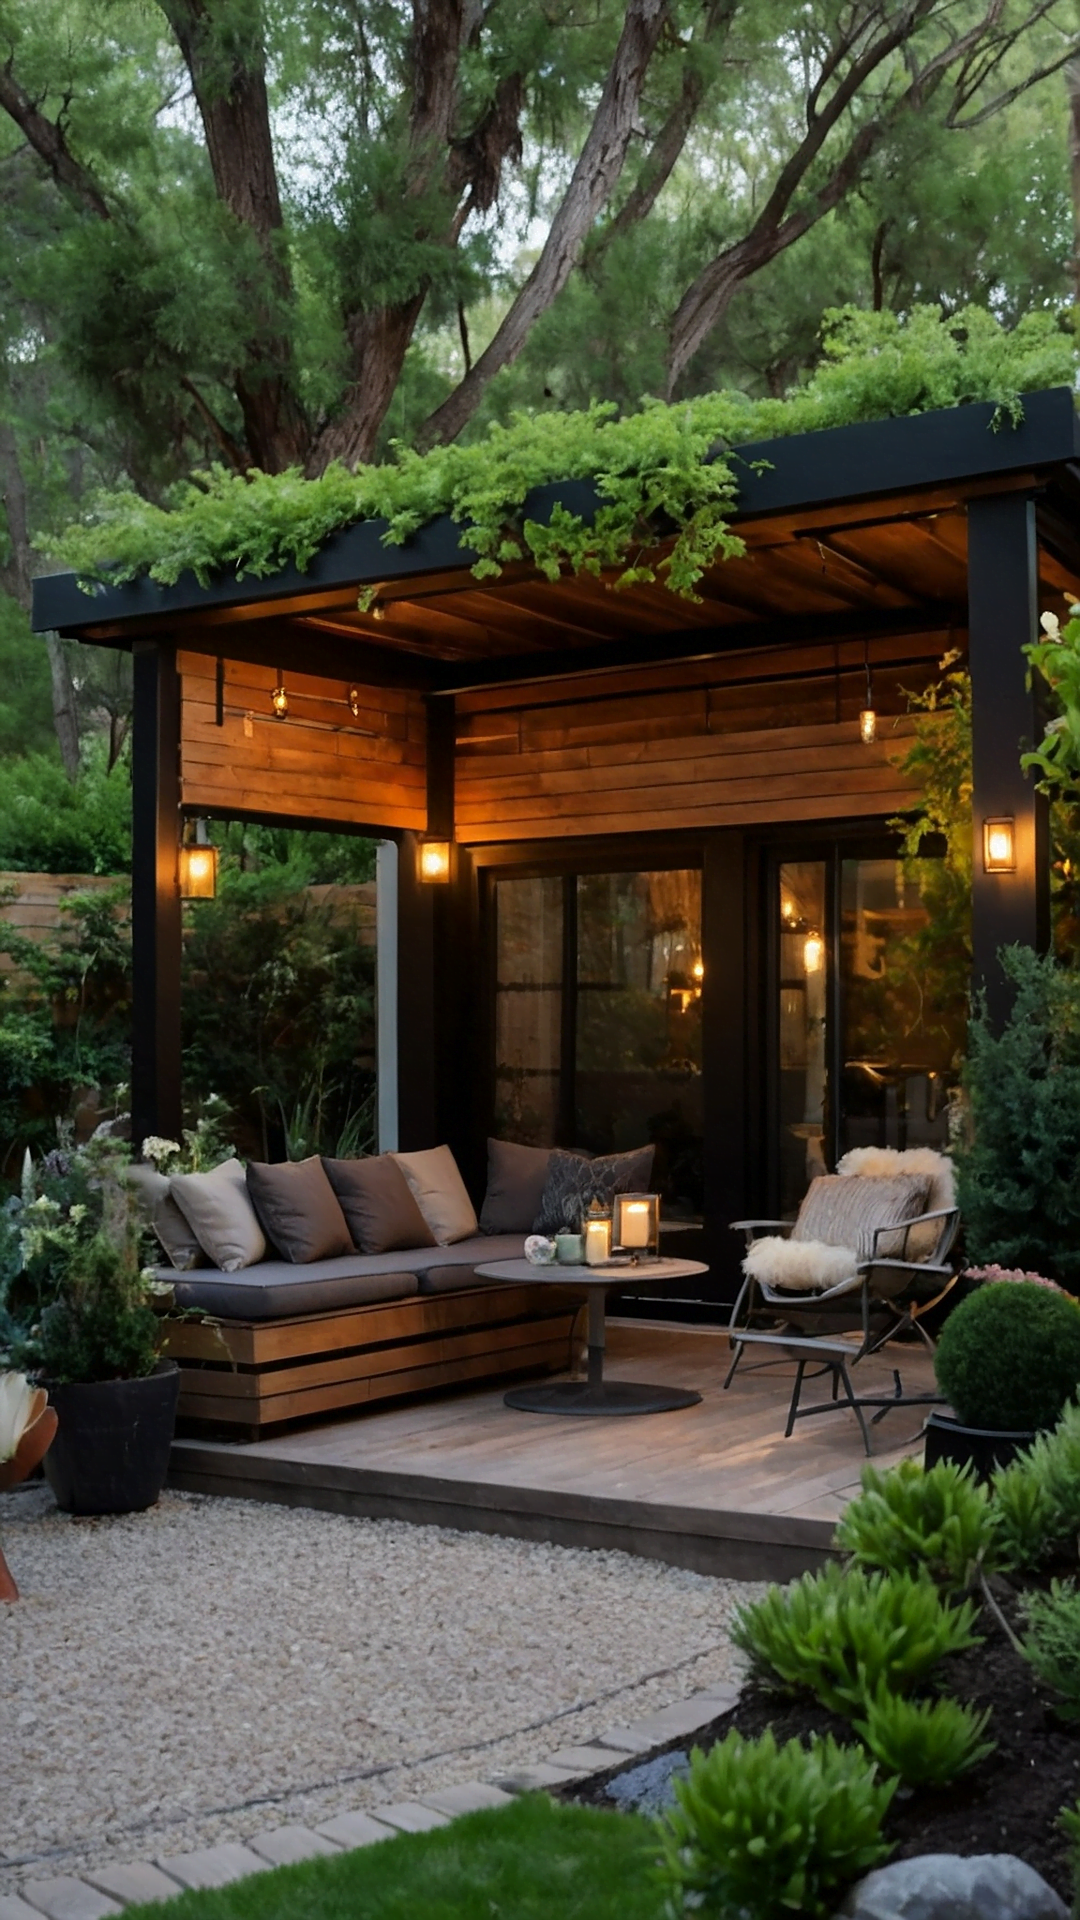 The Compact Gardener: Designing Small, Fruitful Spaces